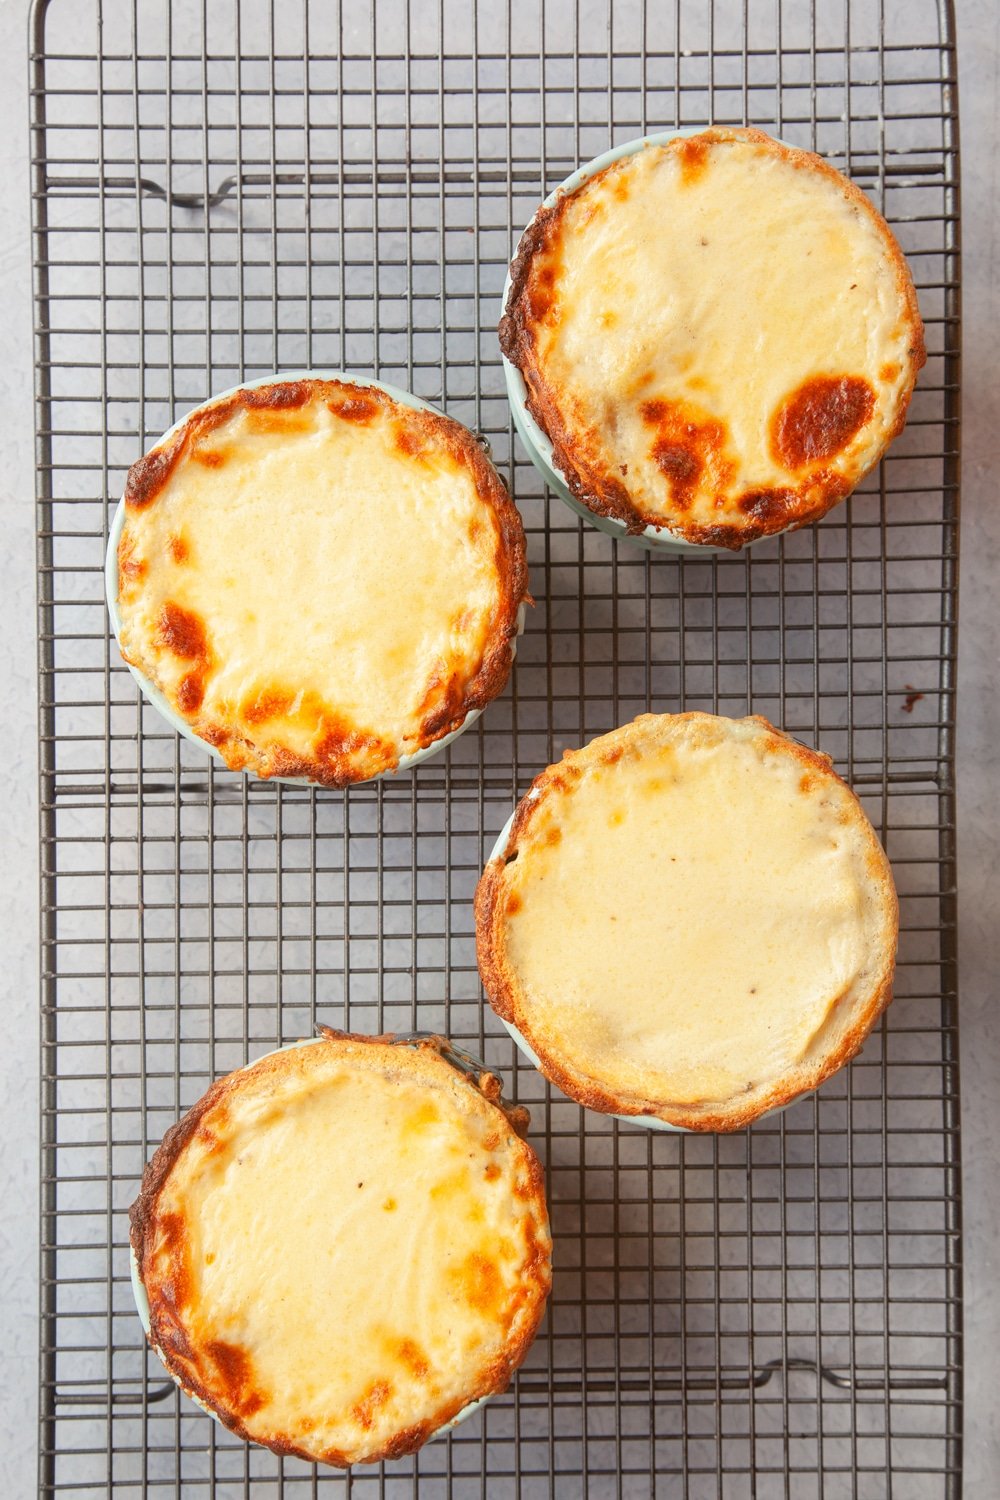 Baked lasagne pies, cooling on a wire rack